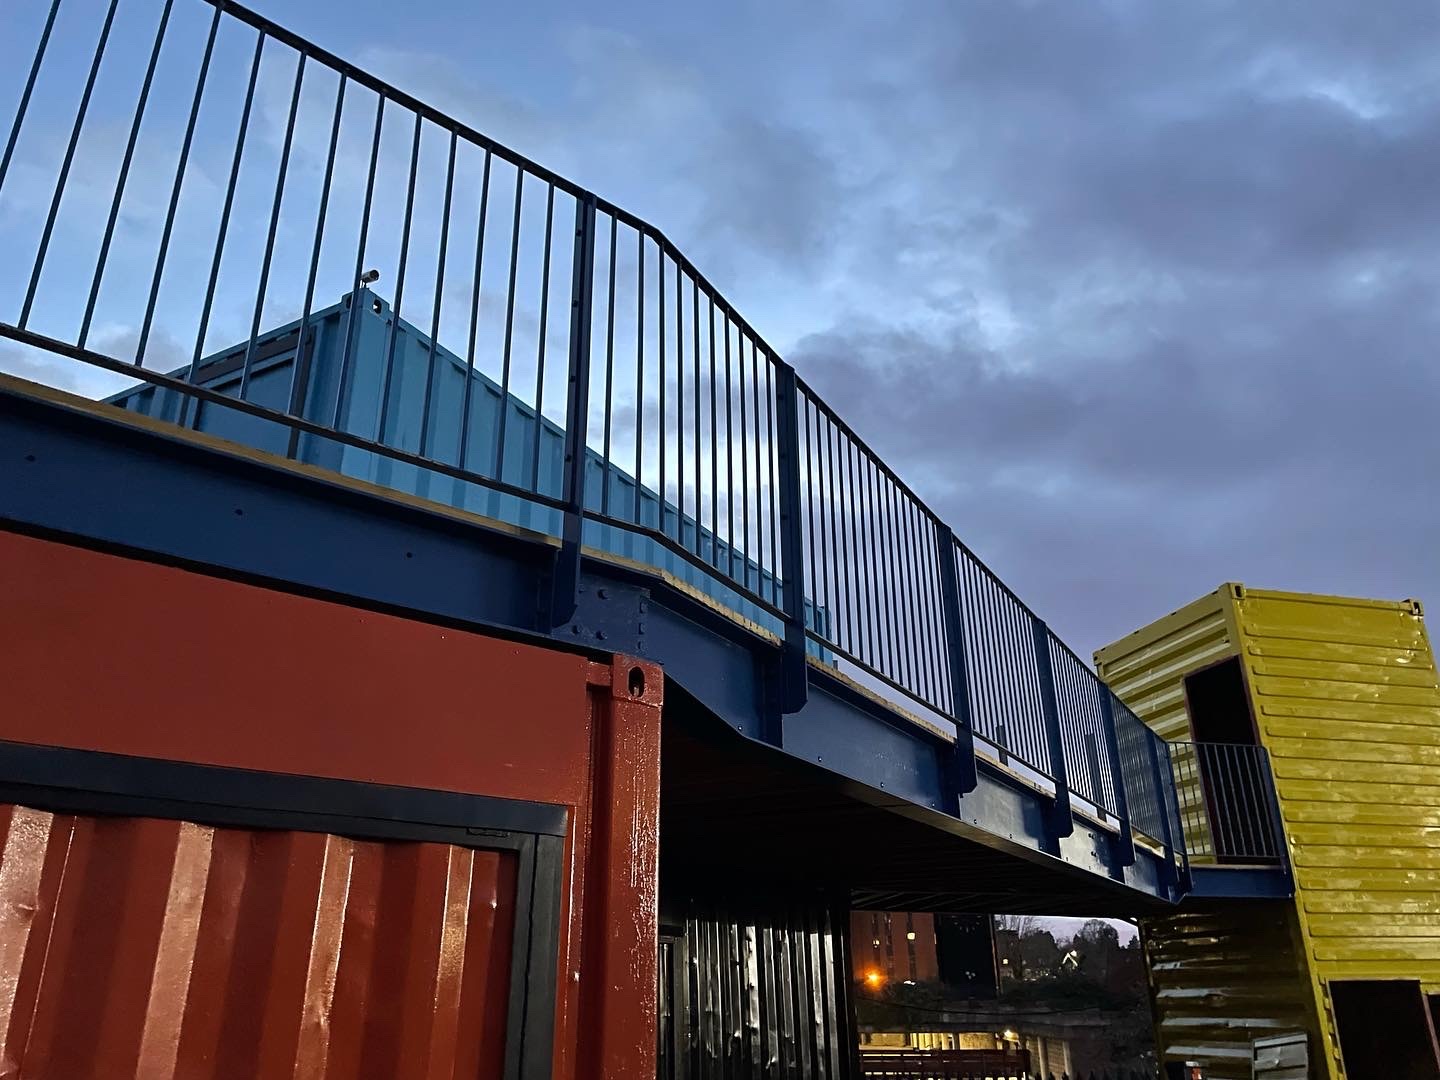 The derelict site has been transformed thanks to the use of shipping containers